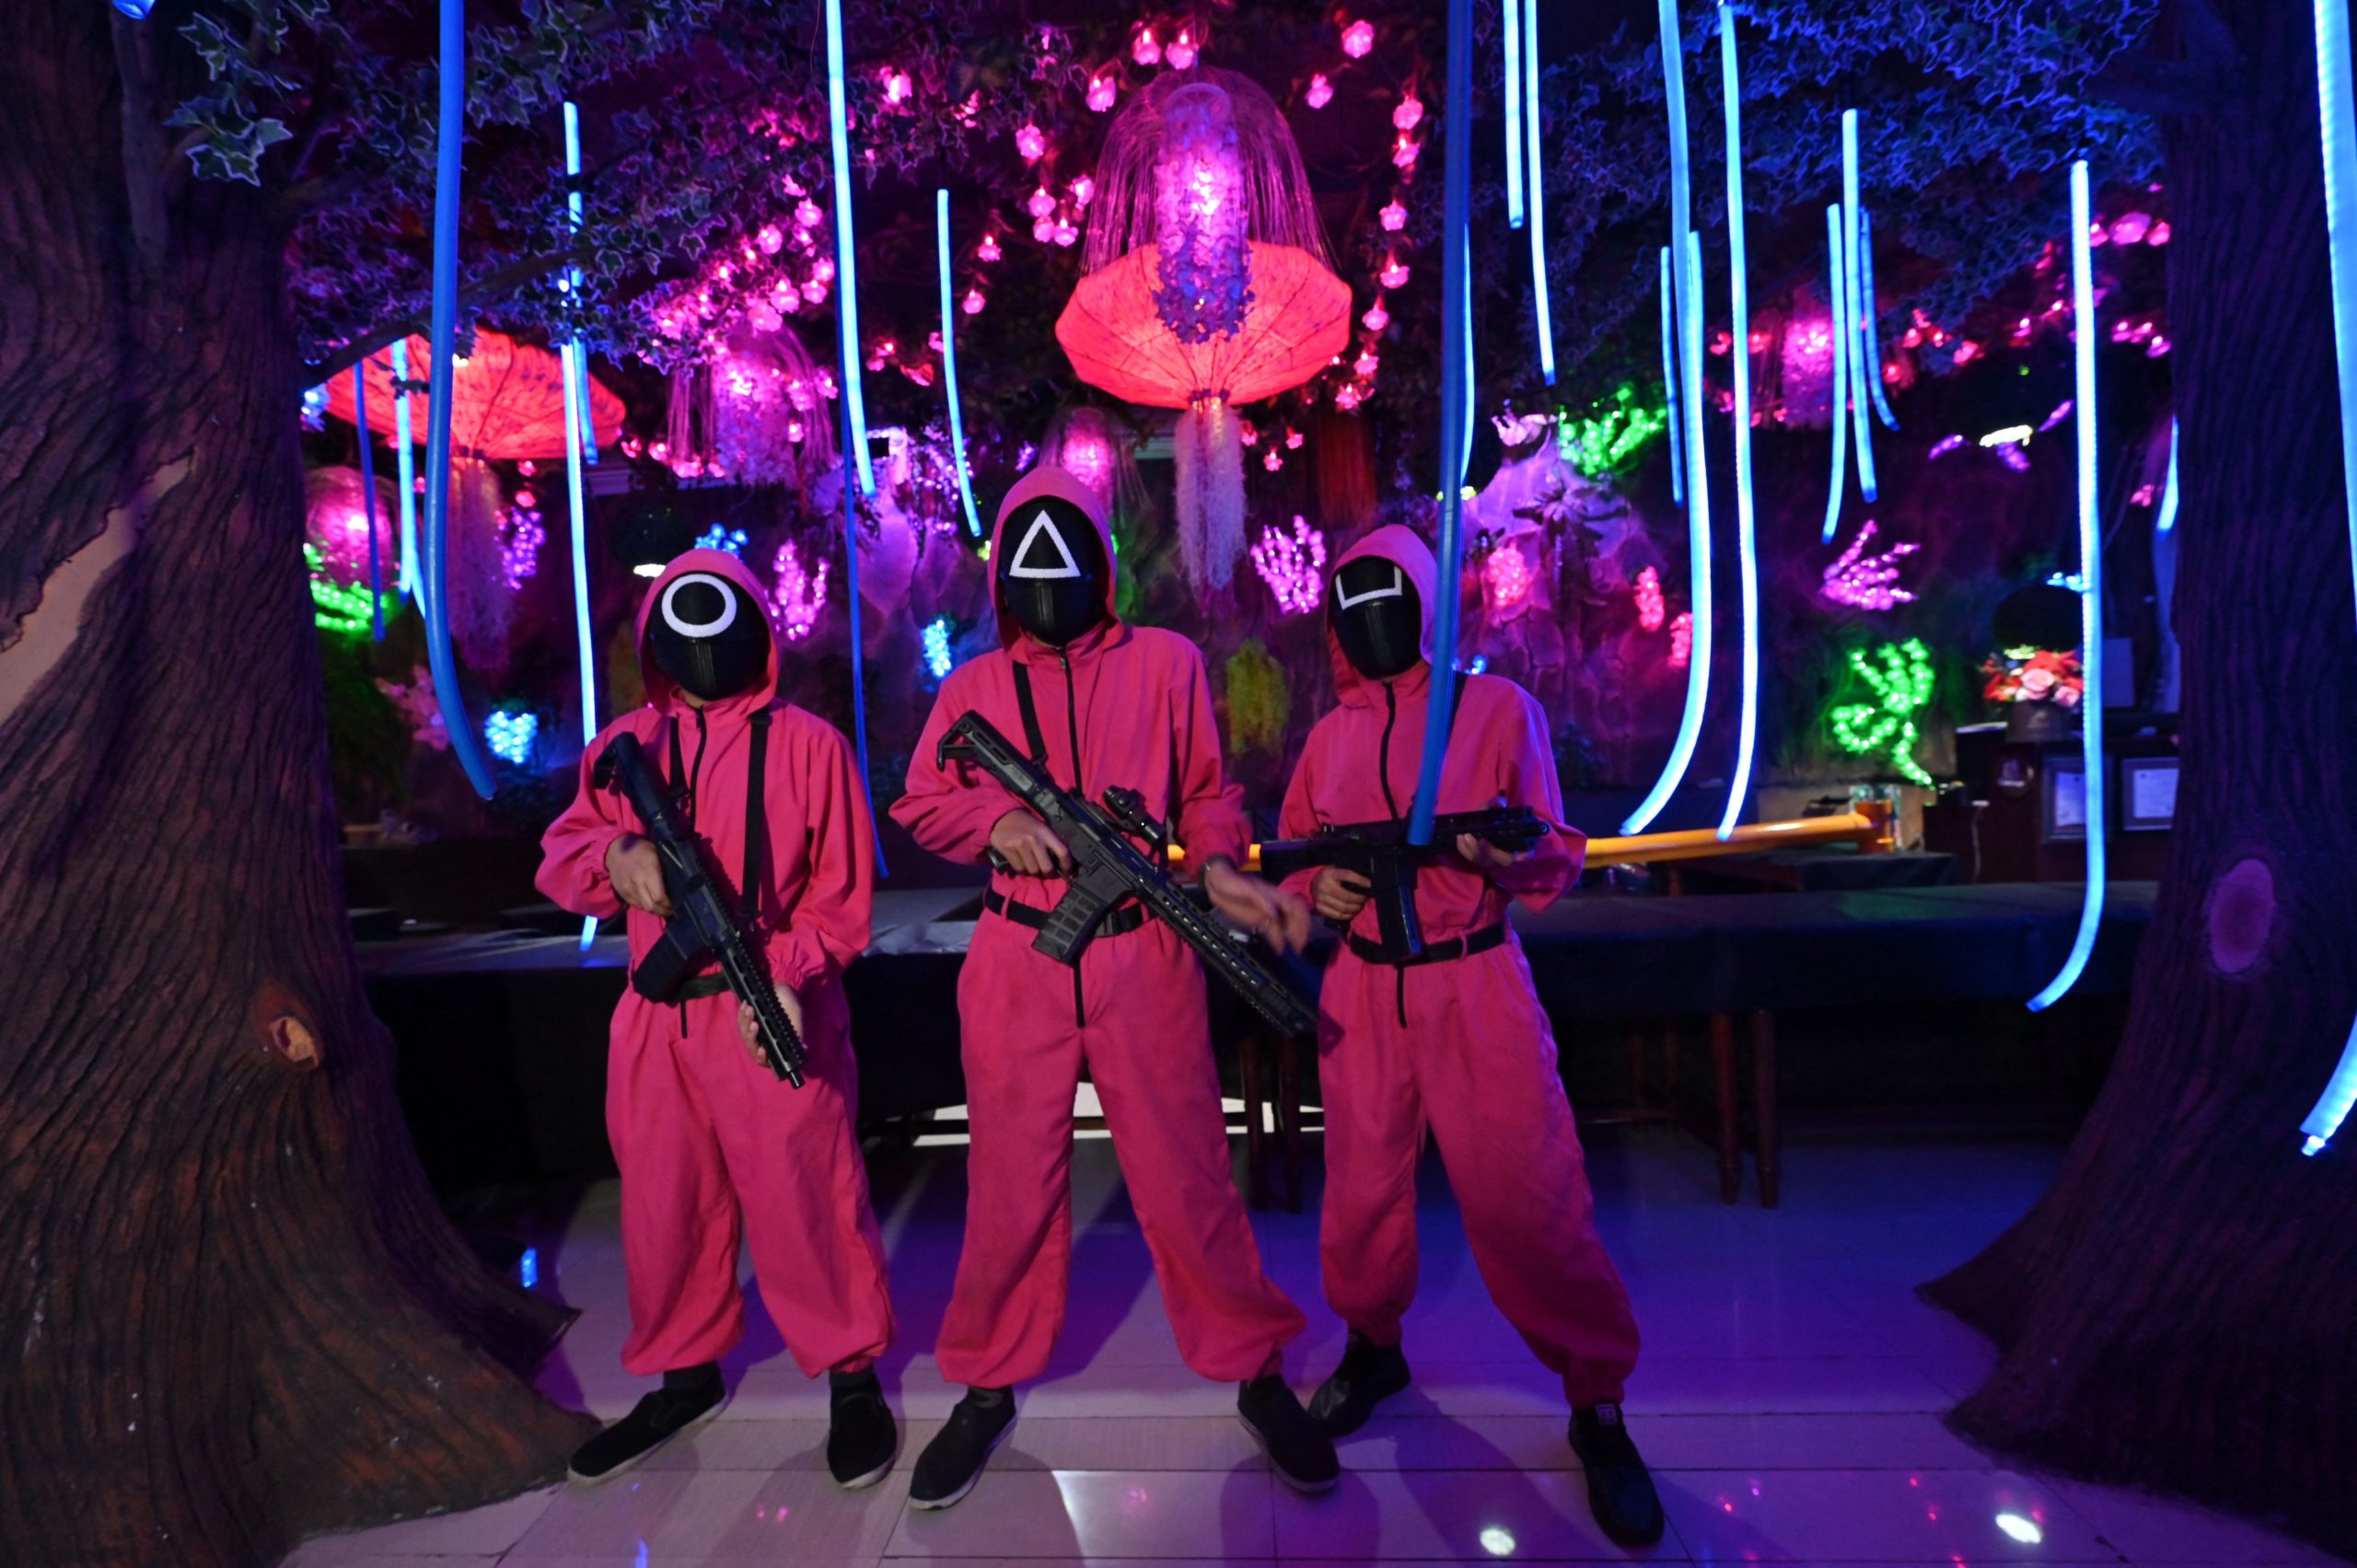 Waiters dressed in outfits from the Netflix series Squid Game pose while playing a game to attract customers at a cafe in Jakarta on October 19, 2021. (Photo by ADEK BERRY / AFP) (Photo by ADEK BERRY/AFP via Getty Images)